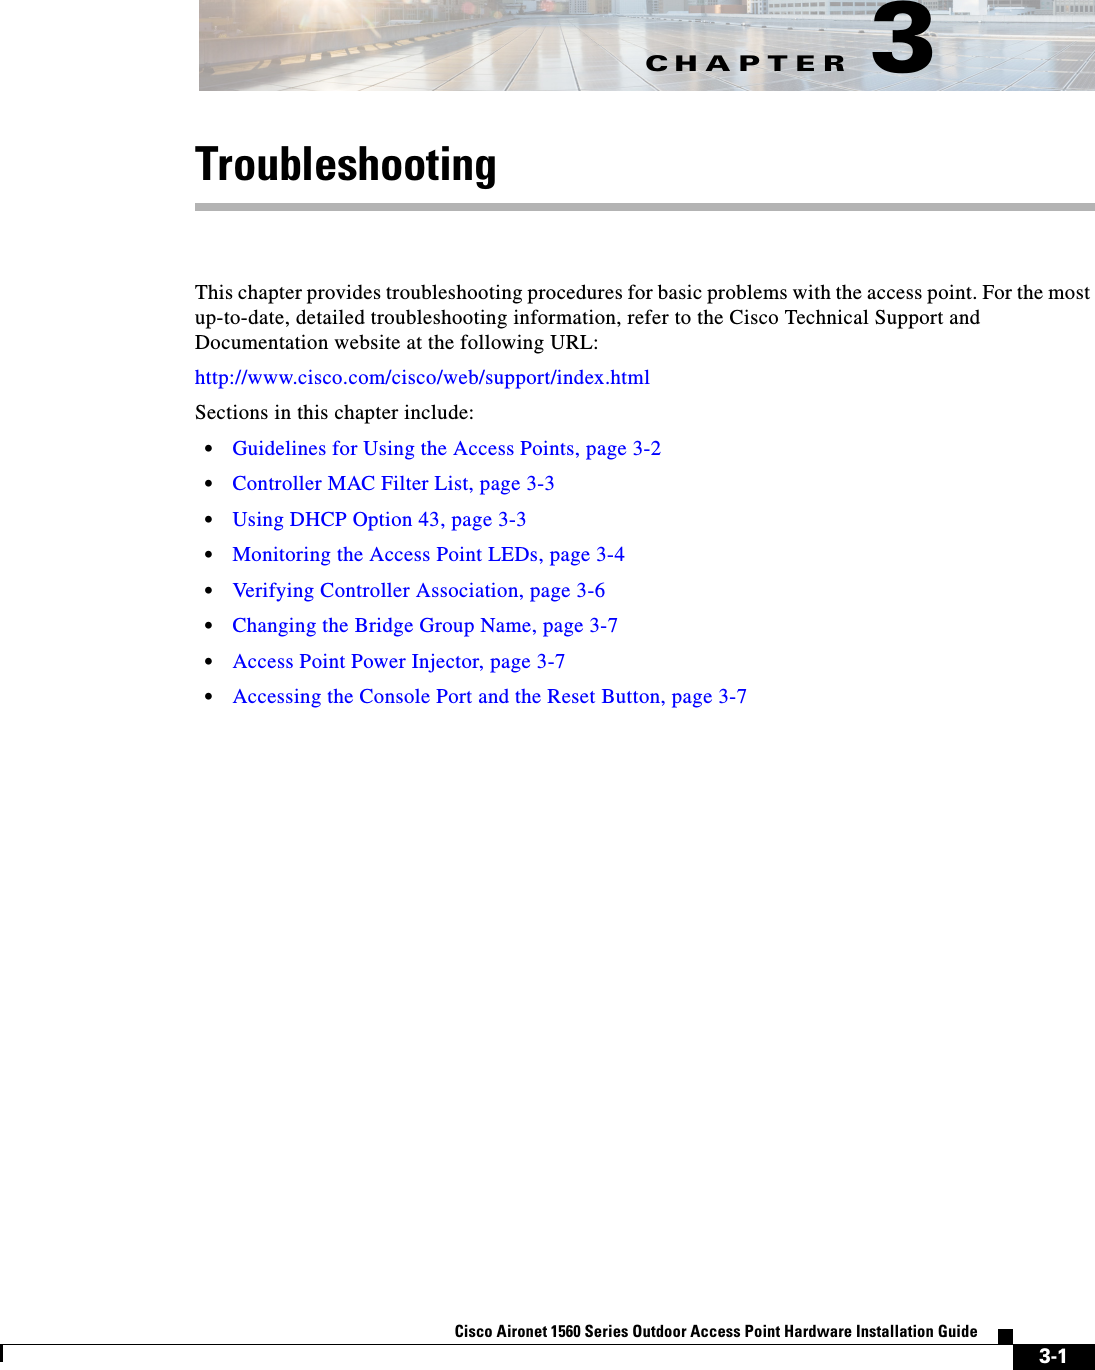 CHAPTER 3-1Cisco Aironet 1560 Series Outdoor Access Point Hardware Installation Guide 3TroubleshootingThis chapter provides troubleshooting procedures for basic problems with the access point. For the most up-to-date, detailed troubleshooting information, refer to the Cisco Technical Support and Documentation website at the following URL:http://www.cisco.com/cisco/web/support/index.htmlSections in this chapter include:•Guidelines for Using the Access Points, page 3-2•Controller MAC Filter List, page 3-3•Using DHCP Option 43, page 3-3•Monitoring the Access Point LEDs, page 3-4•Verifying Controller Association, page 3-6•Changing the Bridge Group Name, page 3-7•Access Point Power Injector, page 3-7•Accessing the Console Port and the Reset Button, page 3-7